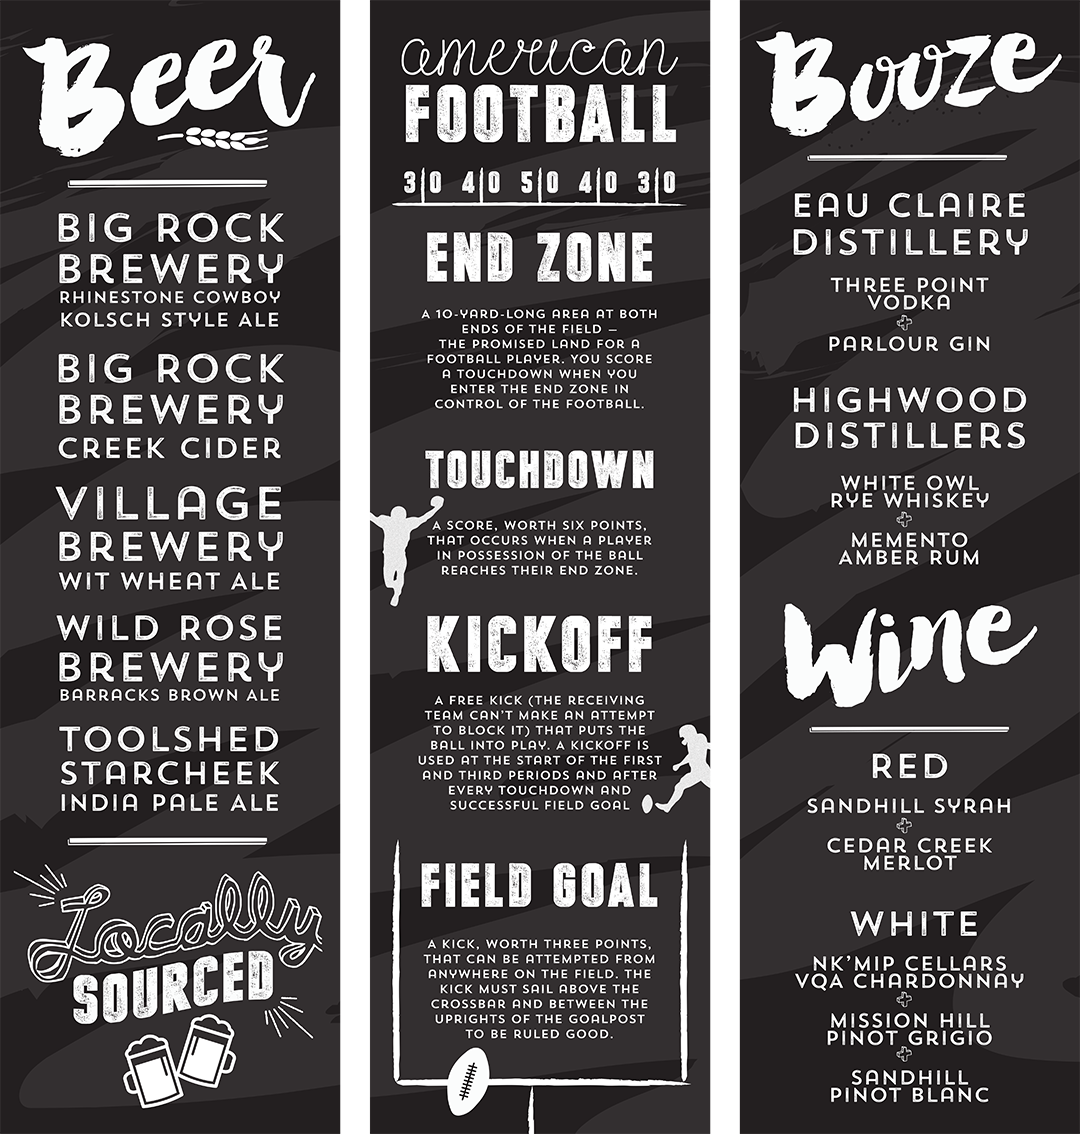 Corporate Signage Design - Beer and Booze